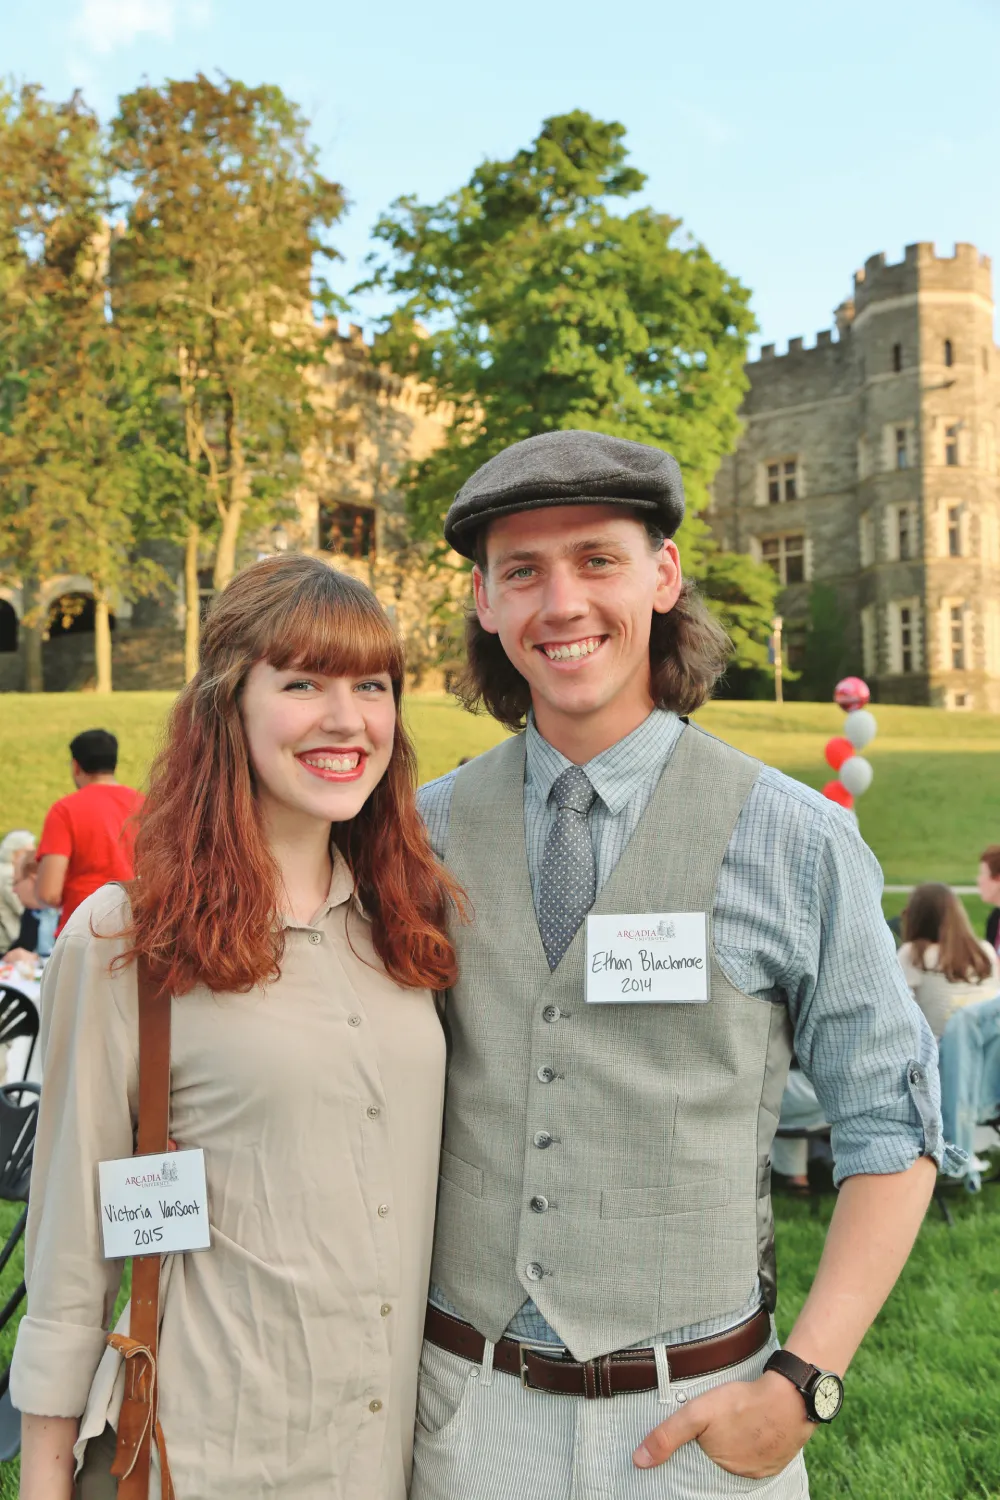 Two alumni students posing together on Haber Green